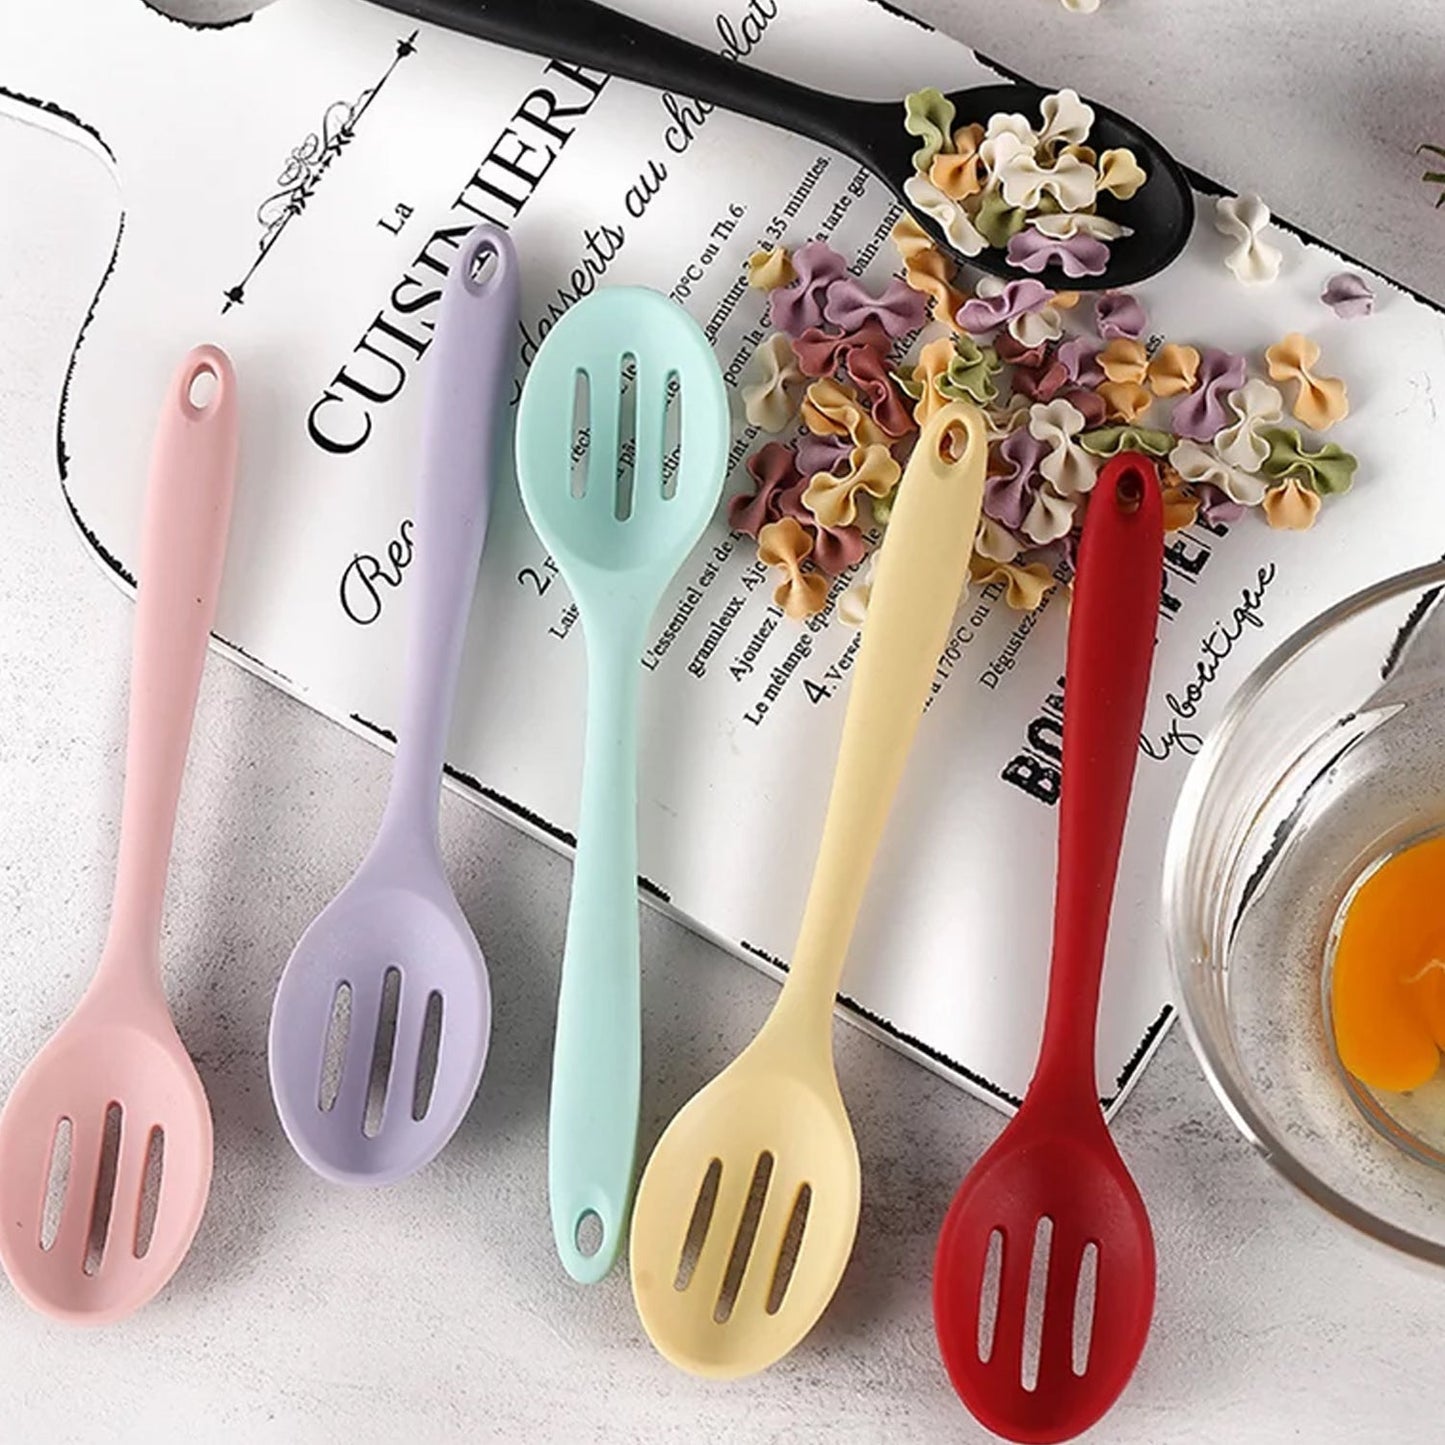 Silicone Cooking Cookware Heat-Resistant Kitchen Utensils Cookware Kitchenware (27cm)